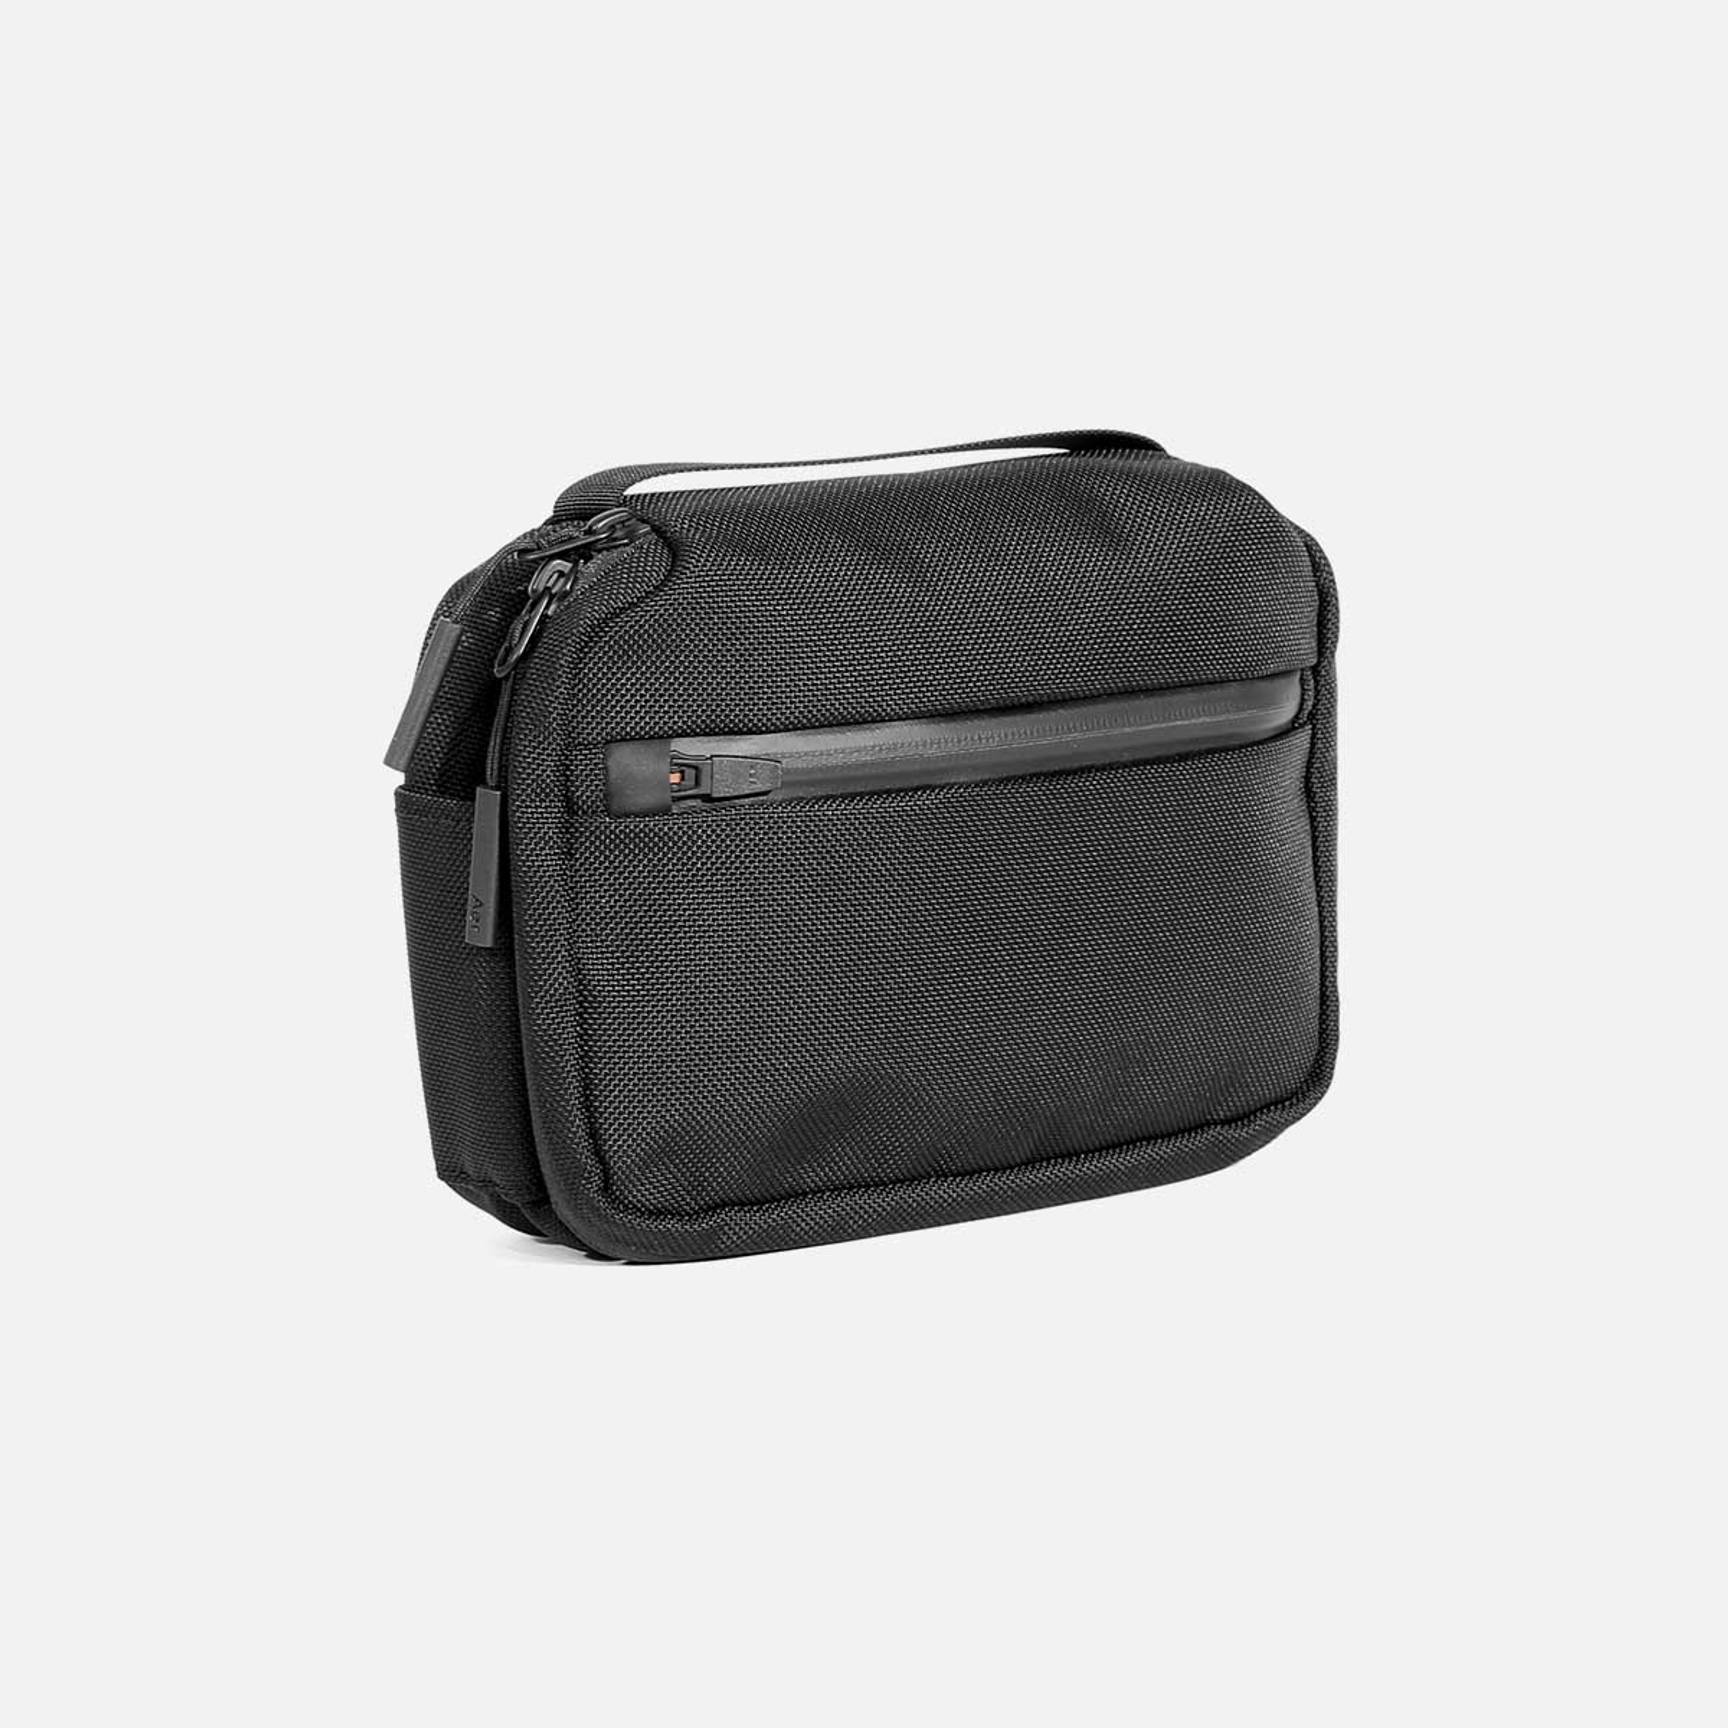 toiletry bags for men: Best-selling toiletry bags for men under